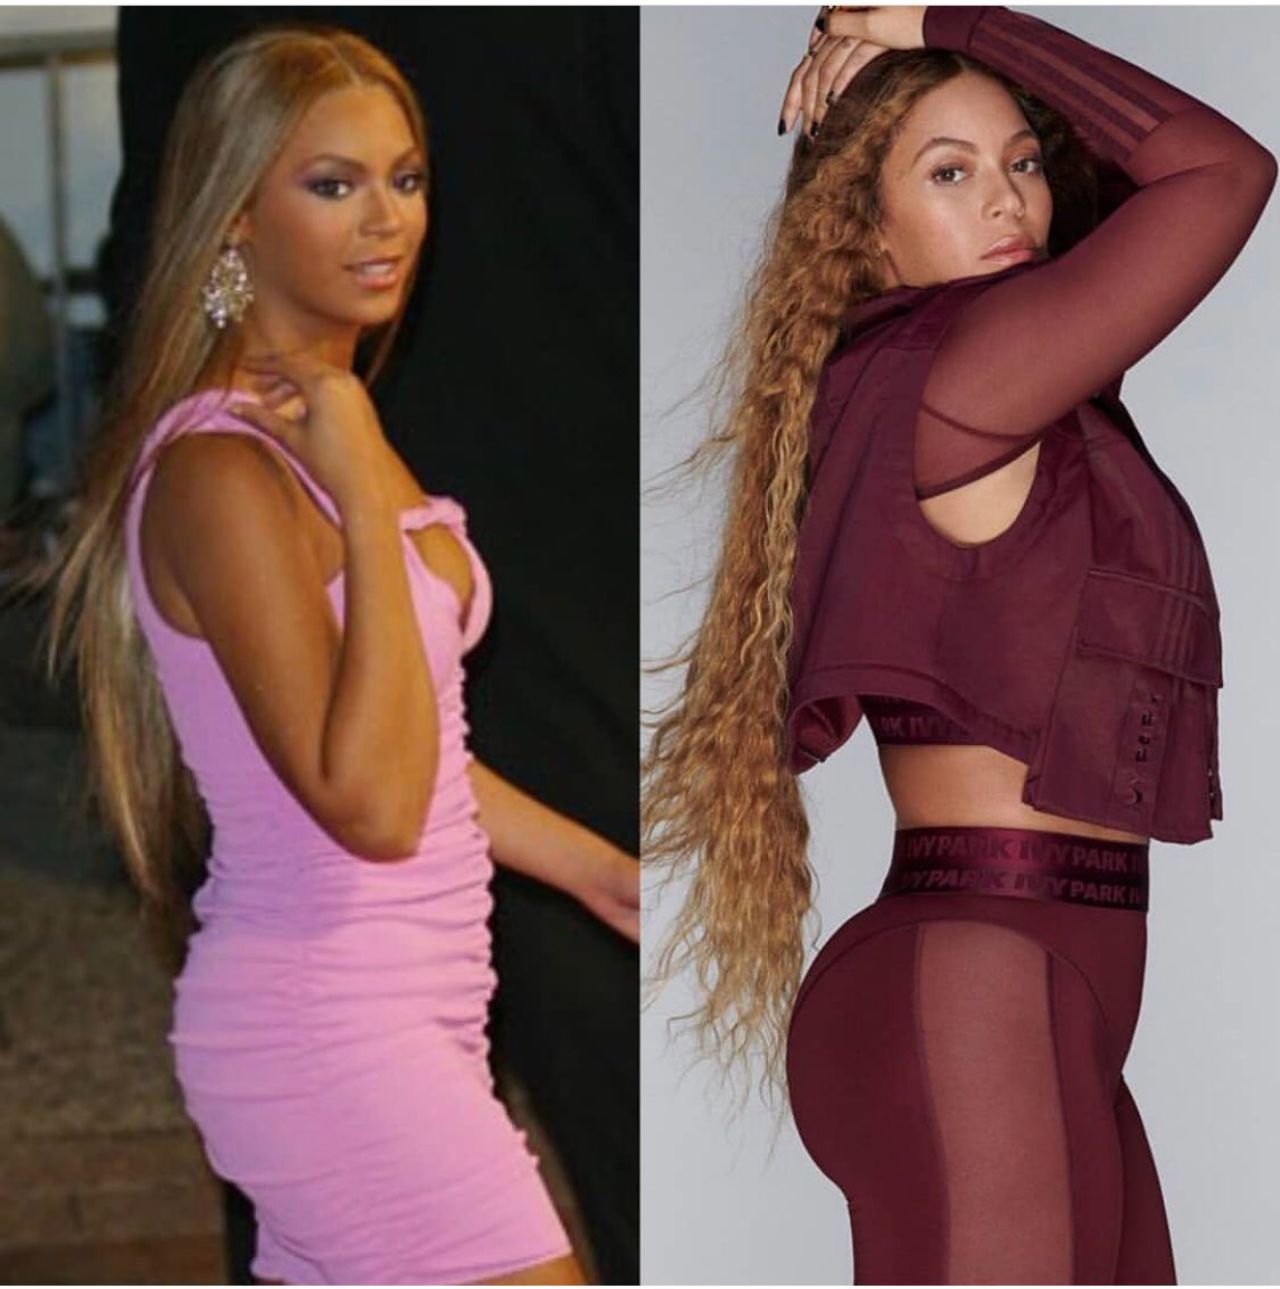 Beyonce is suspected by many of undergoing a BBL procedure.
houseandwhips.com